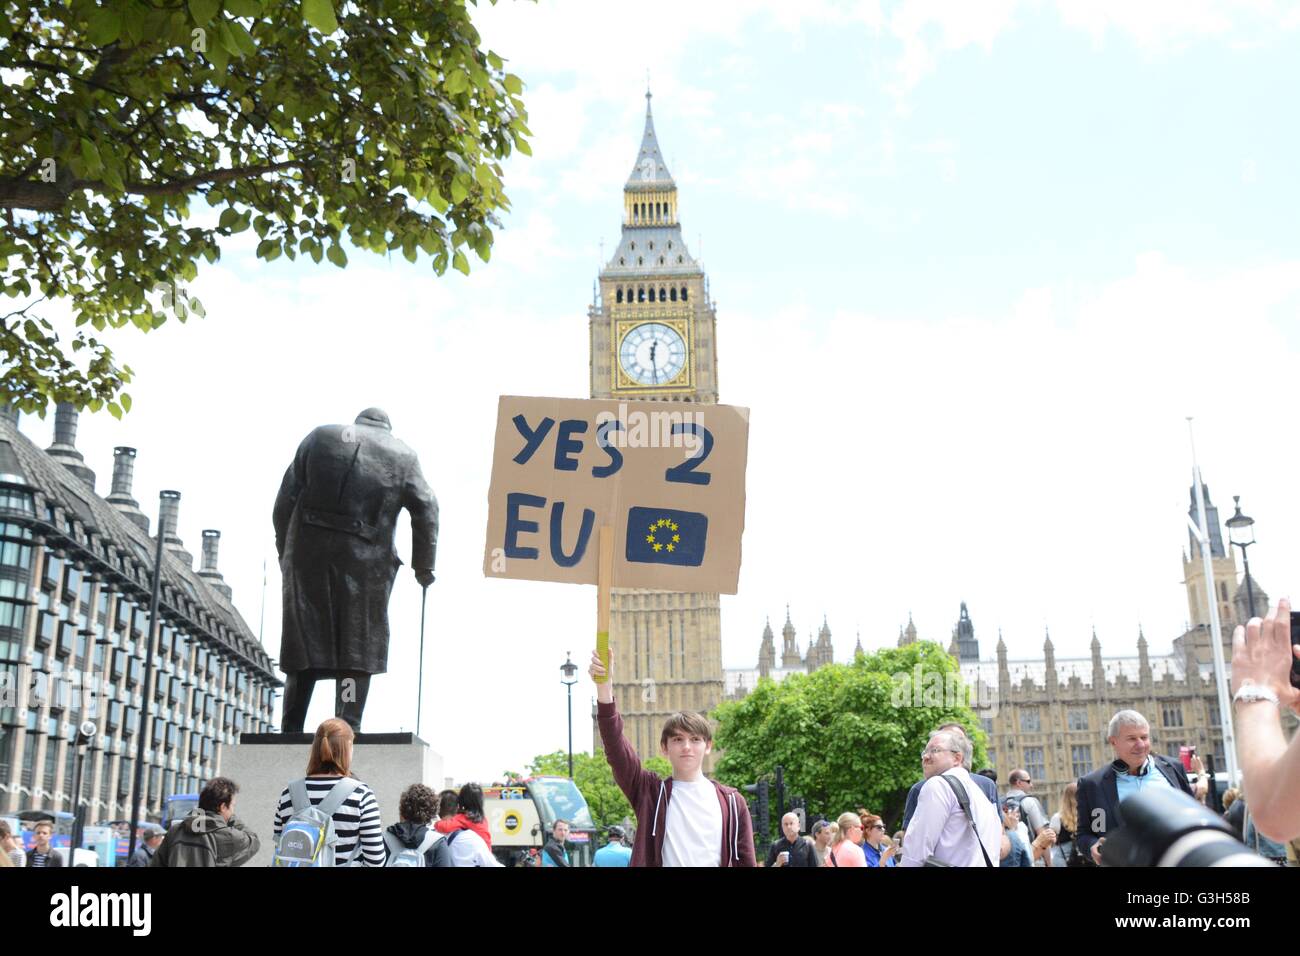 London, UK. 25th June 2016. Protester holds a placardb by the statue to Winson Churchill and in front of Big Ben saying 'Yes 2 EU'. Credit: Marc Ward/Alamy Live News Stock Photo